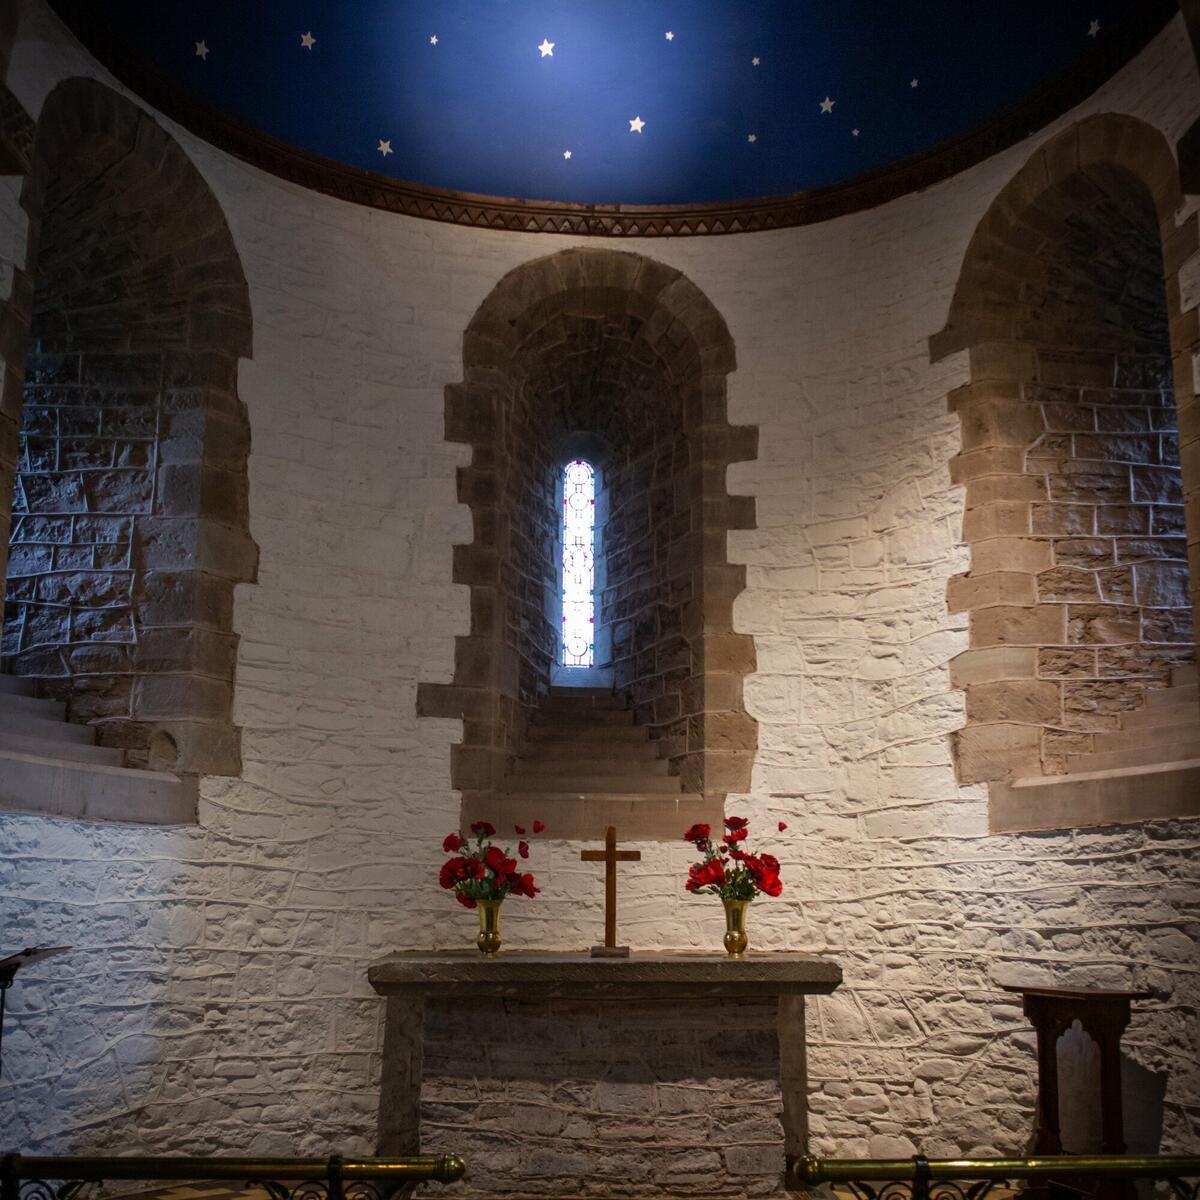 There is time for quiet reflection and prayer in the apse.